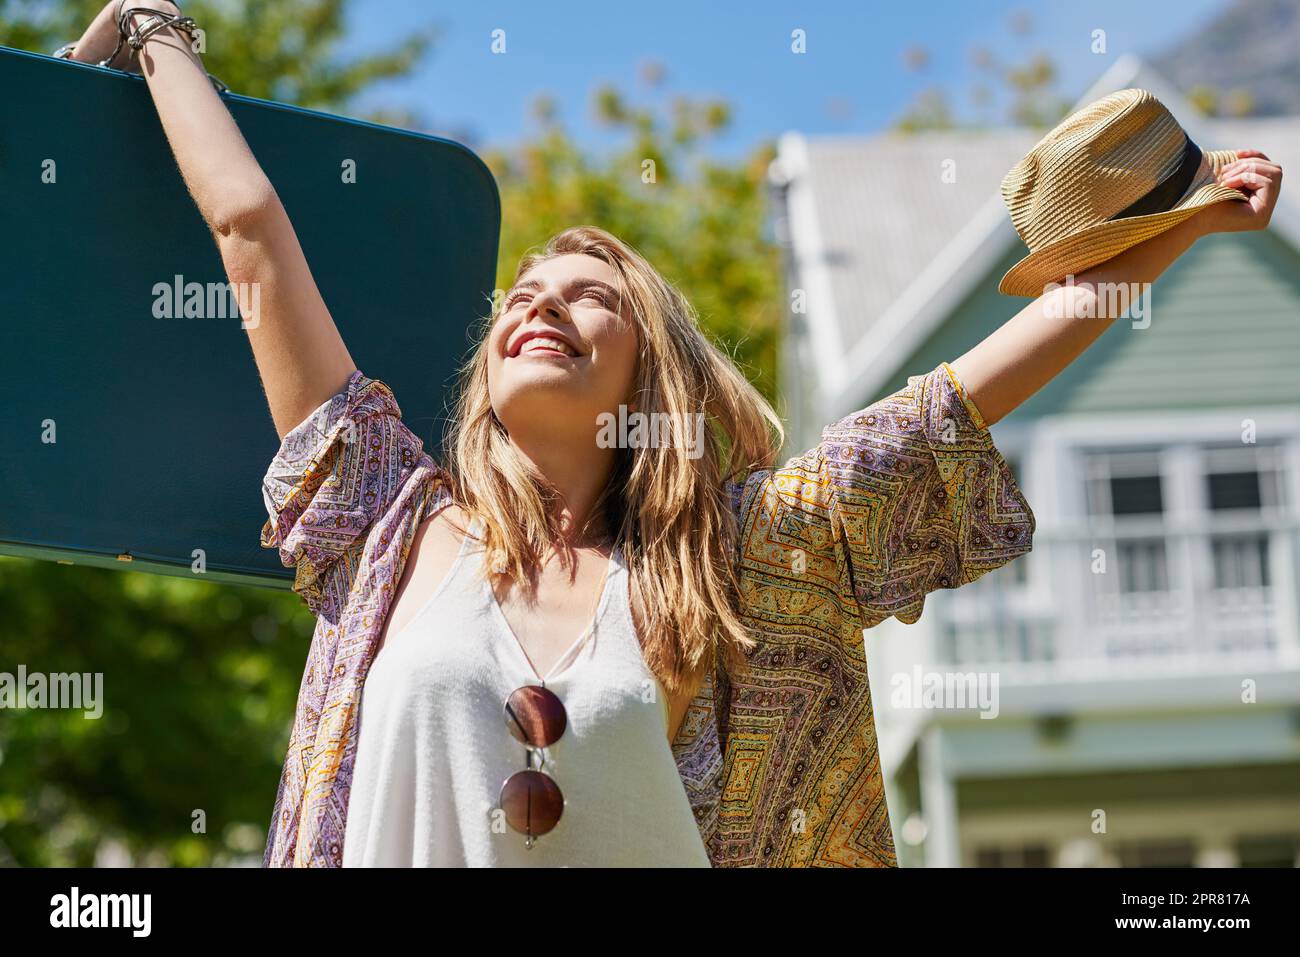 My life is mine and Im living it. Shot of an attractive young woman standing outside her home on a summers day and cheering. Stock Photo